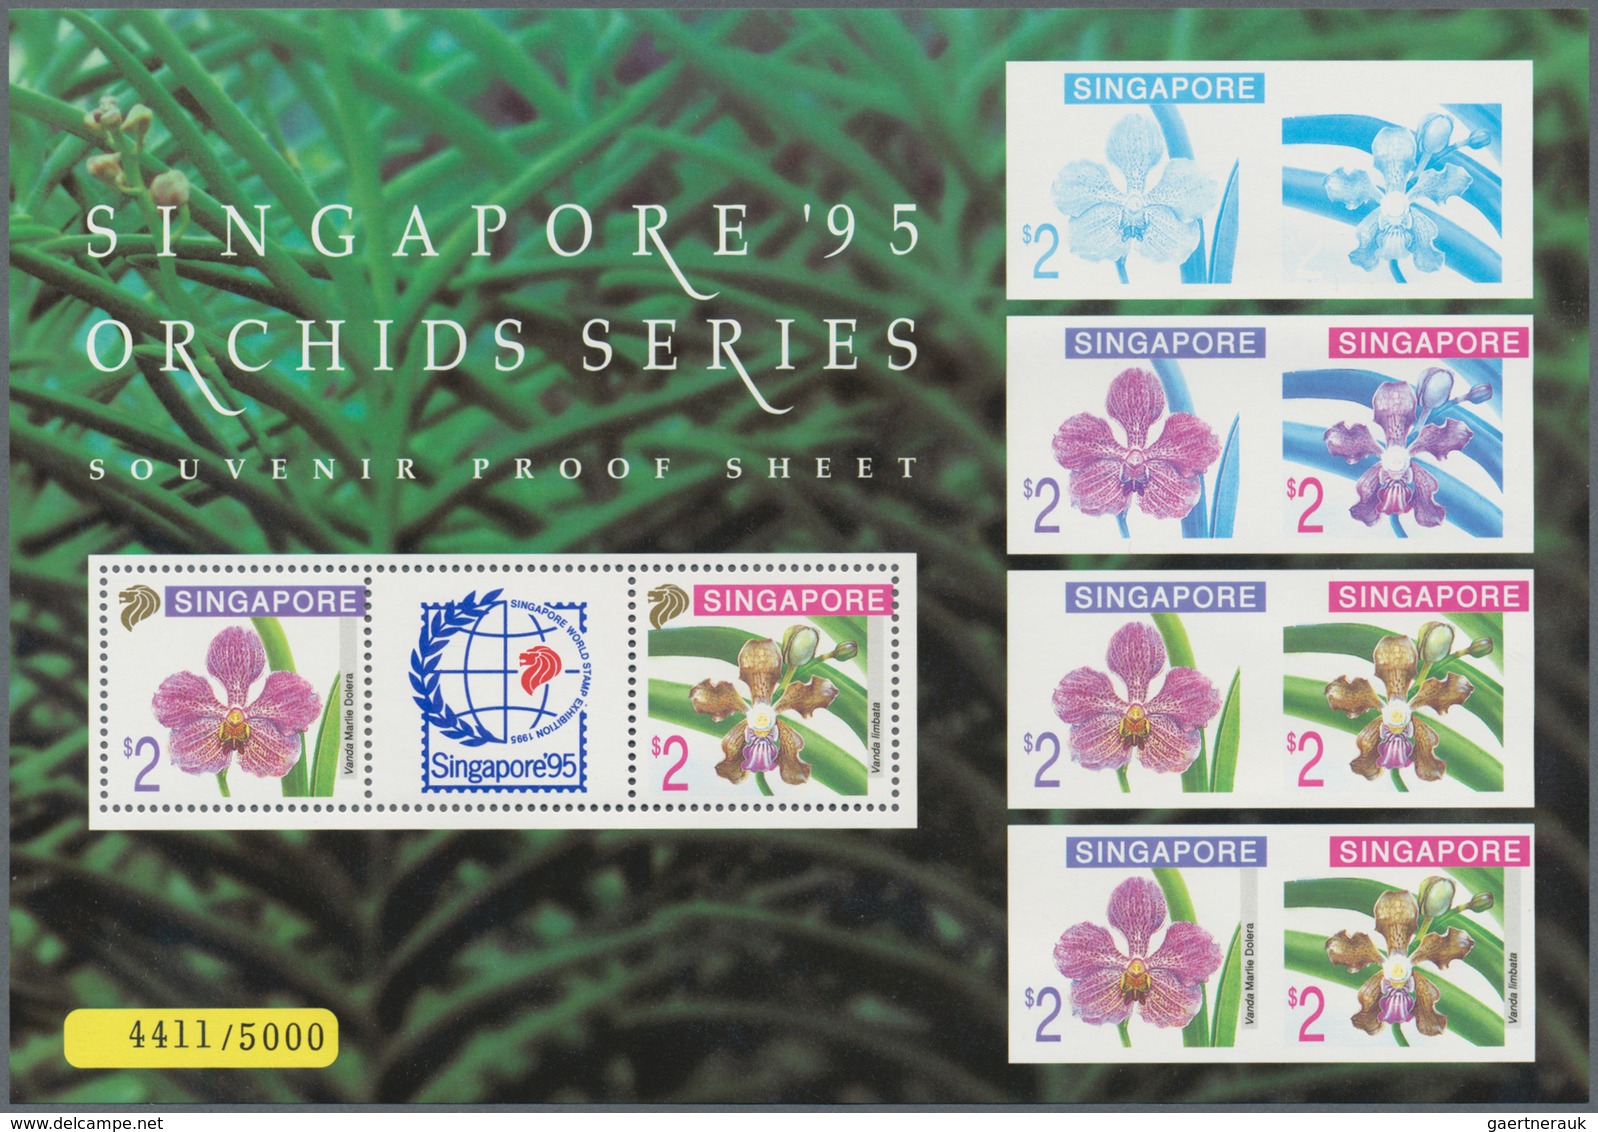 Singapur: 1995 Stock Of 160 'Orchids' Miniature Sheets, With 100 Of The Small One With Orange Backgr - Singapore (...-1959)